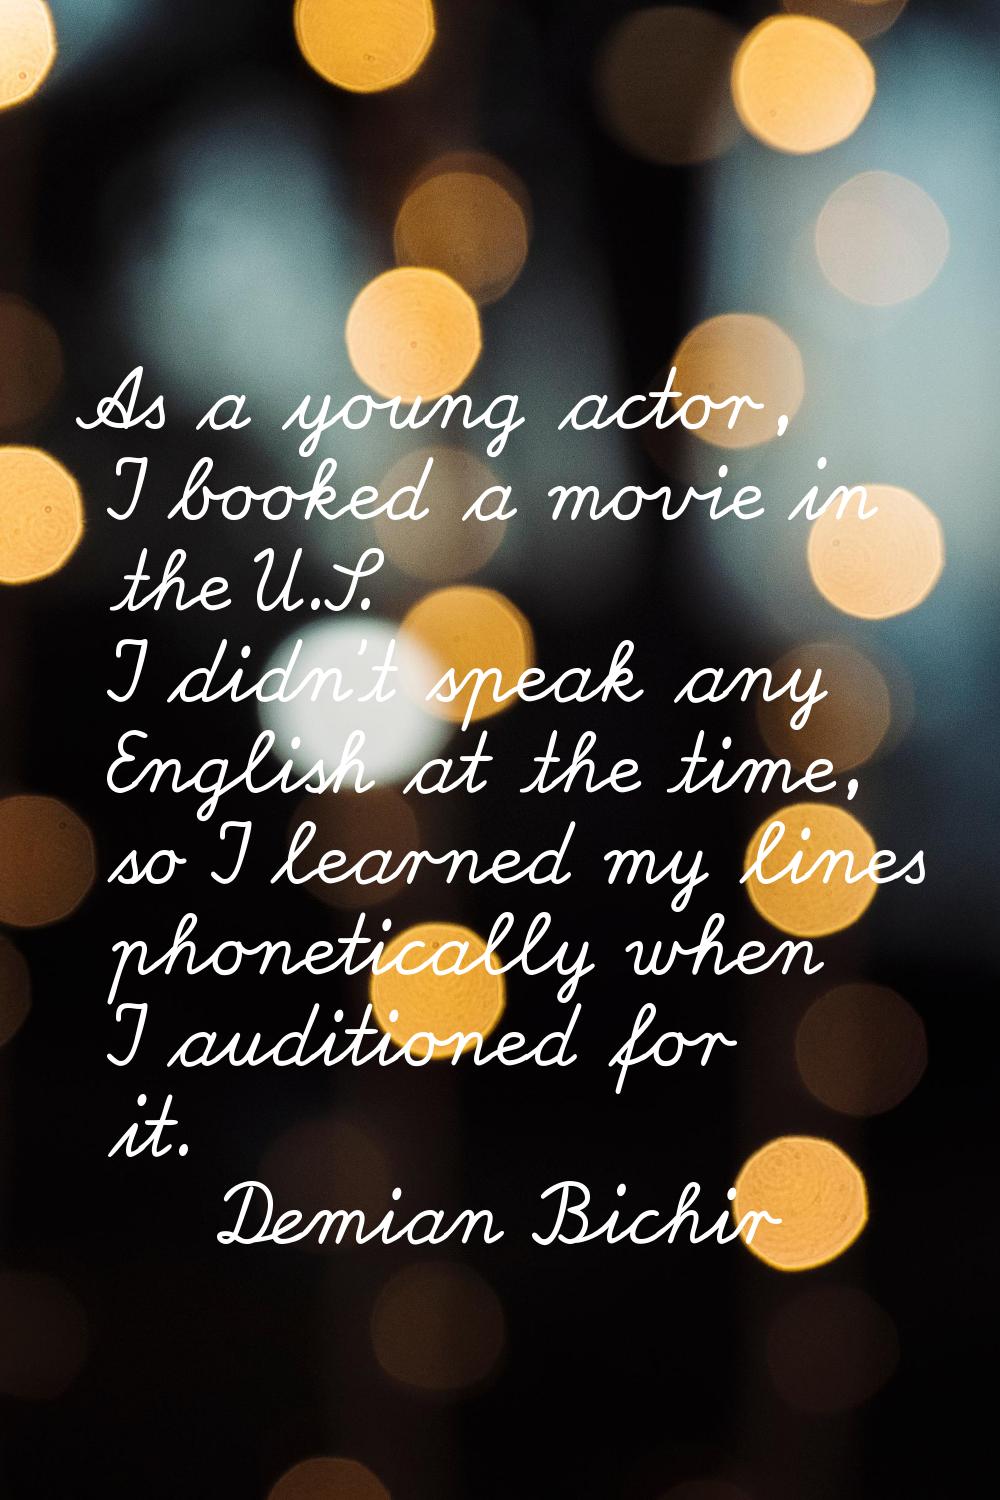 As a young actor, I booked a movie in the U.S. I didn't speak any English at the time, so I learned